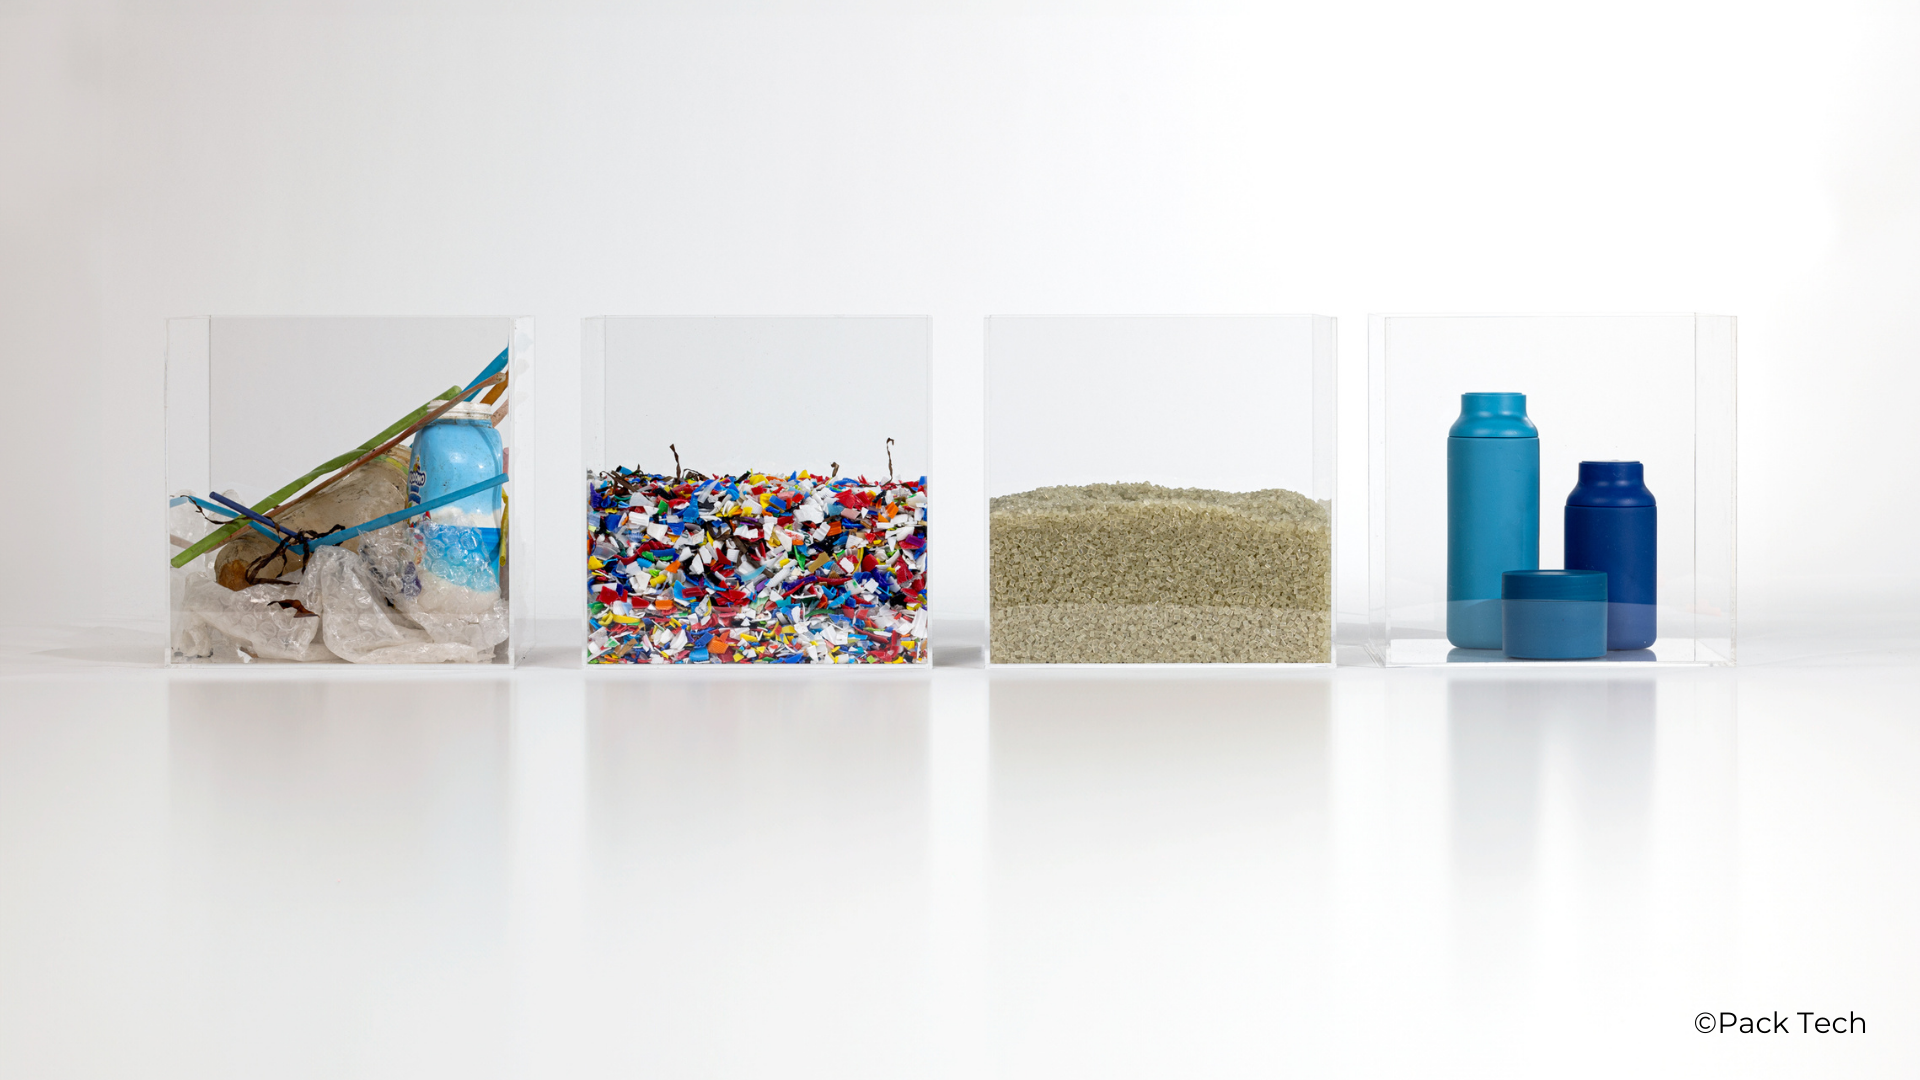 Ocean waste plastic process from Pack tech